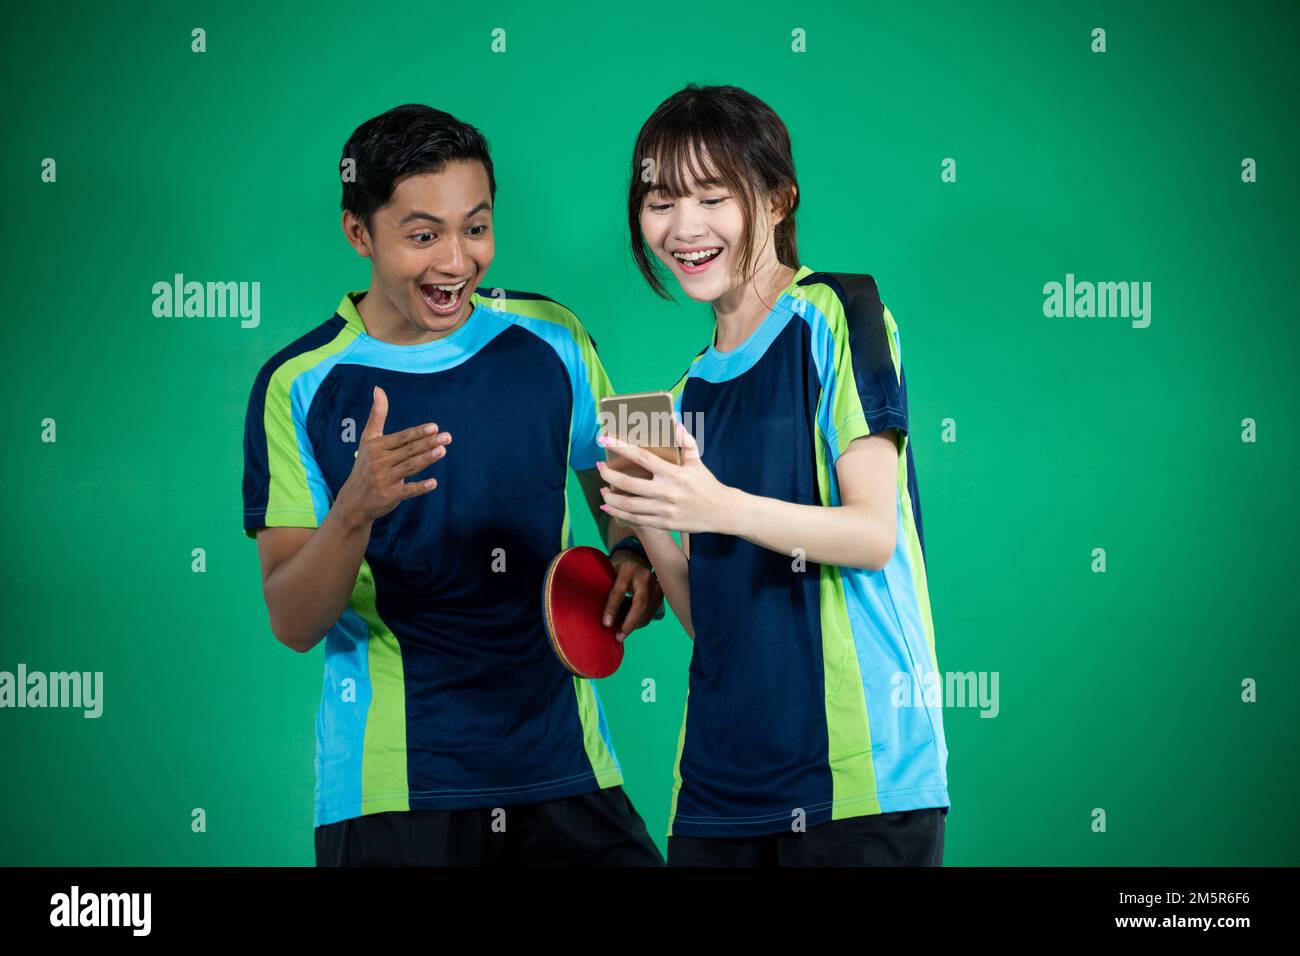 Asian female and male athletes excited to look at smartphones Stock Photo